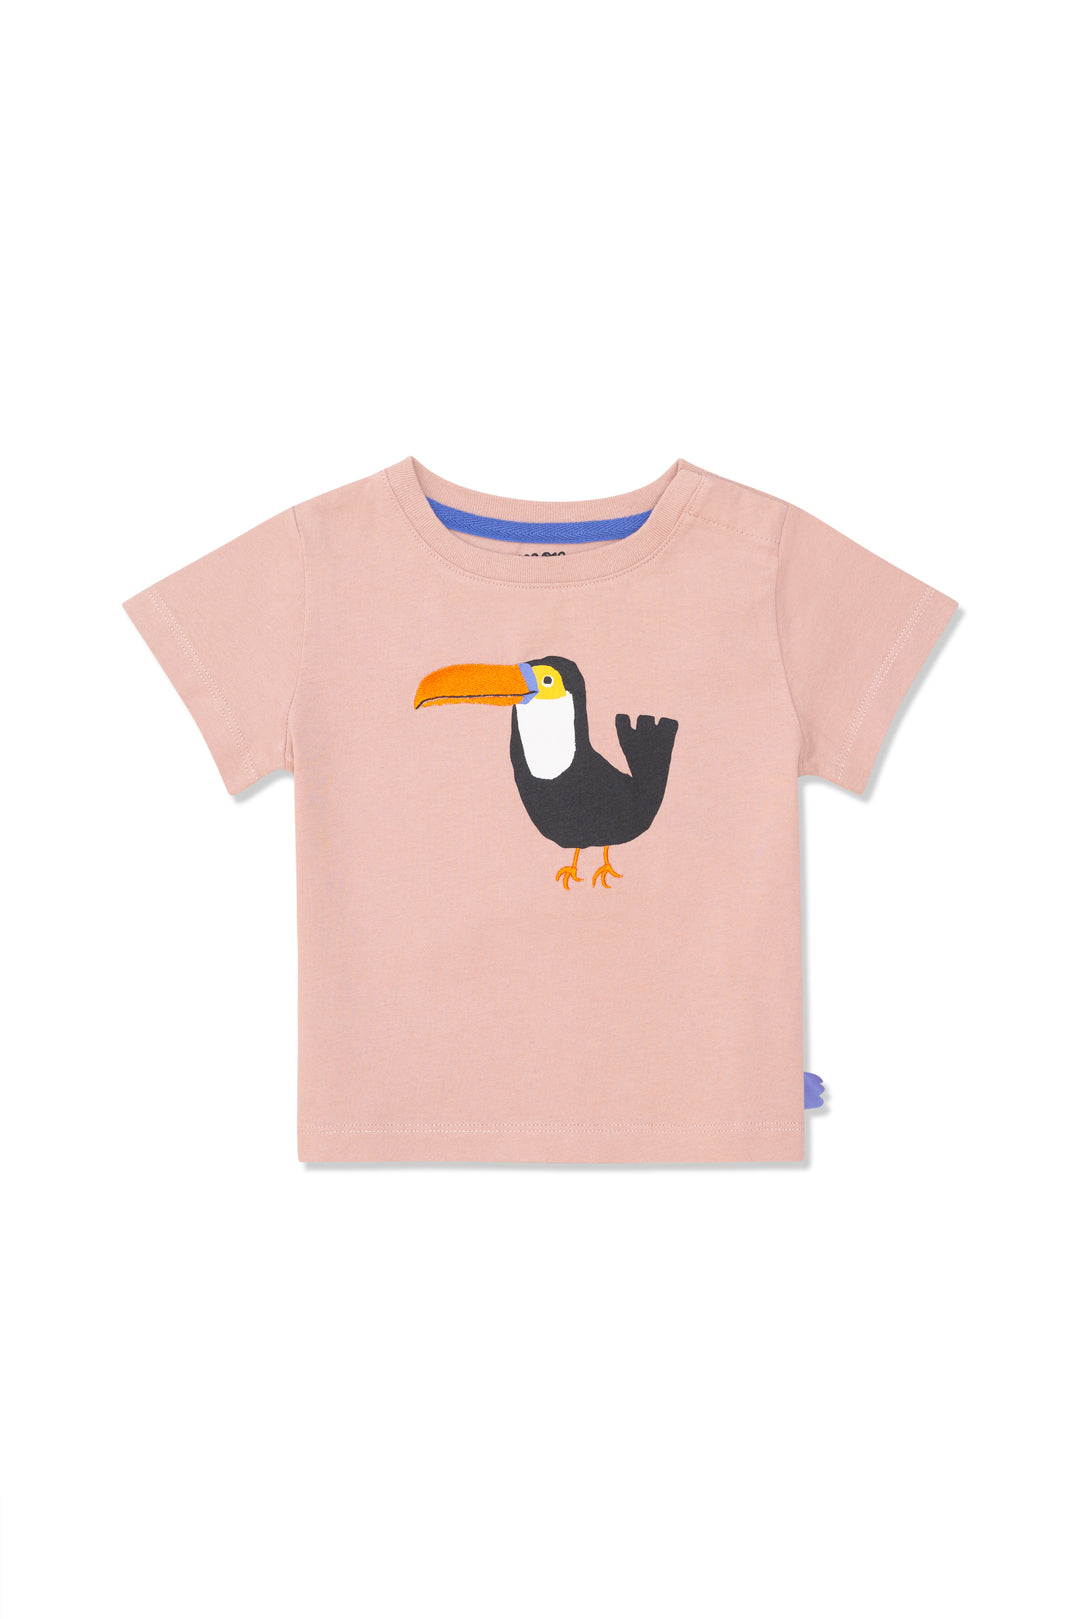 TOUCAN BABY TSHIRT-Misty Rose